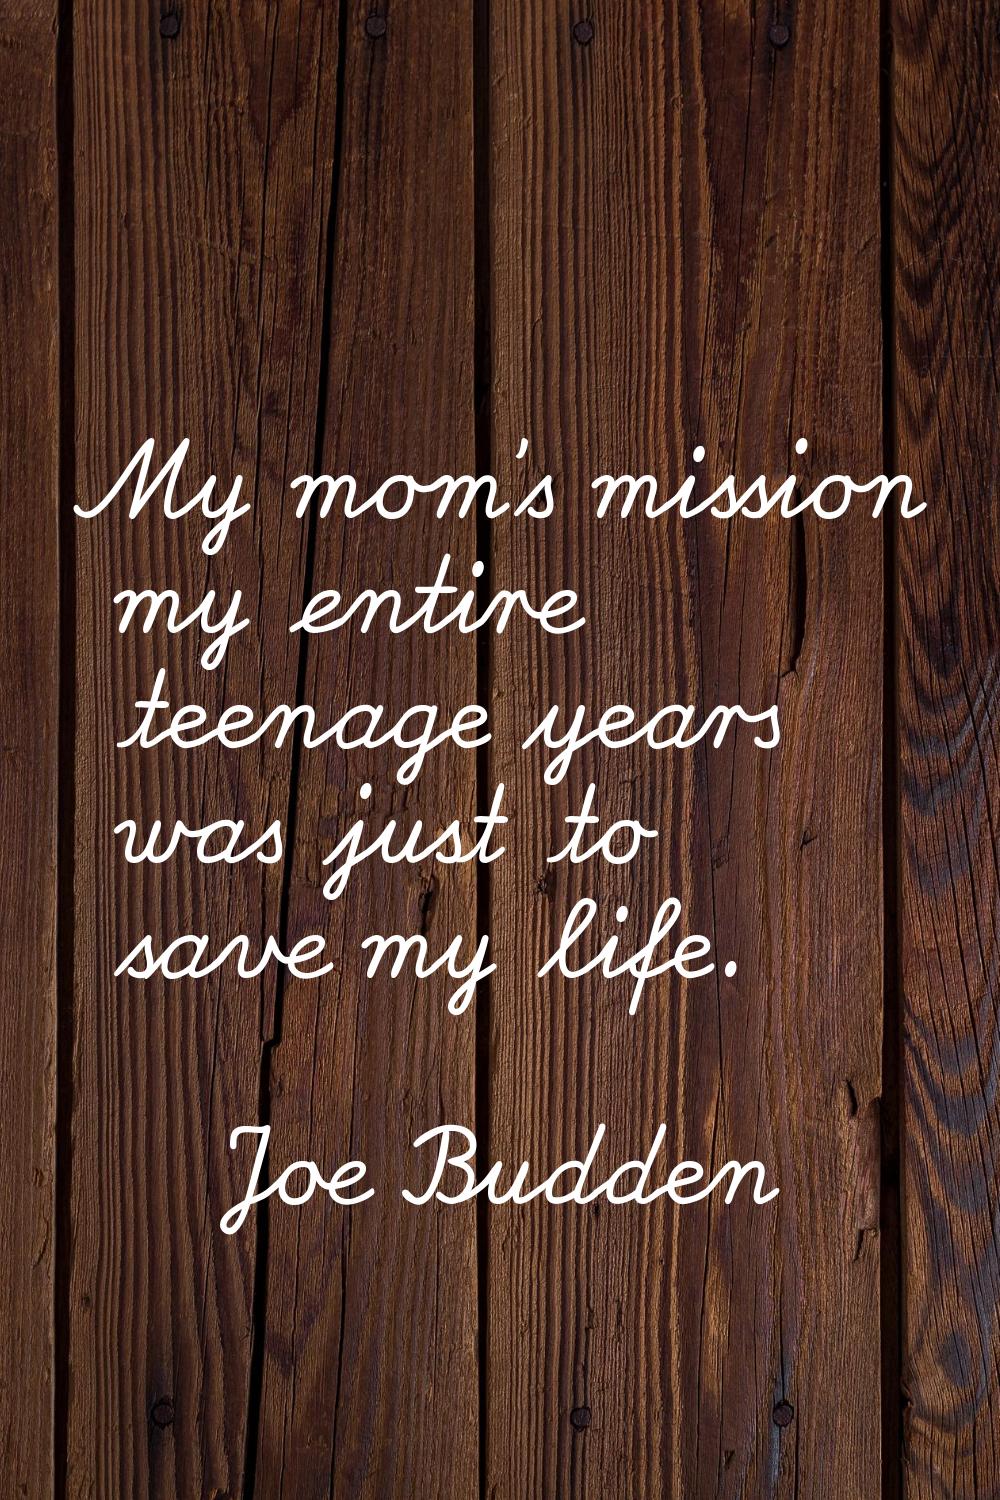 My mom’s mission my entire teenage years was just to save my life.